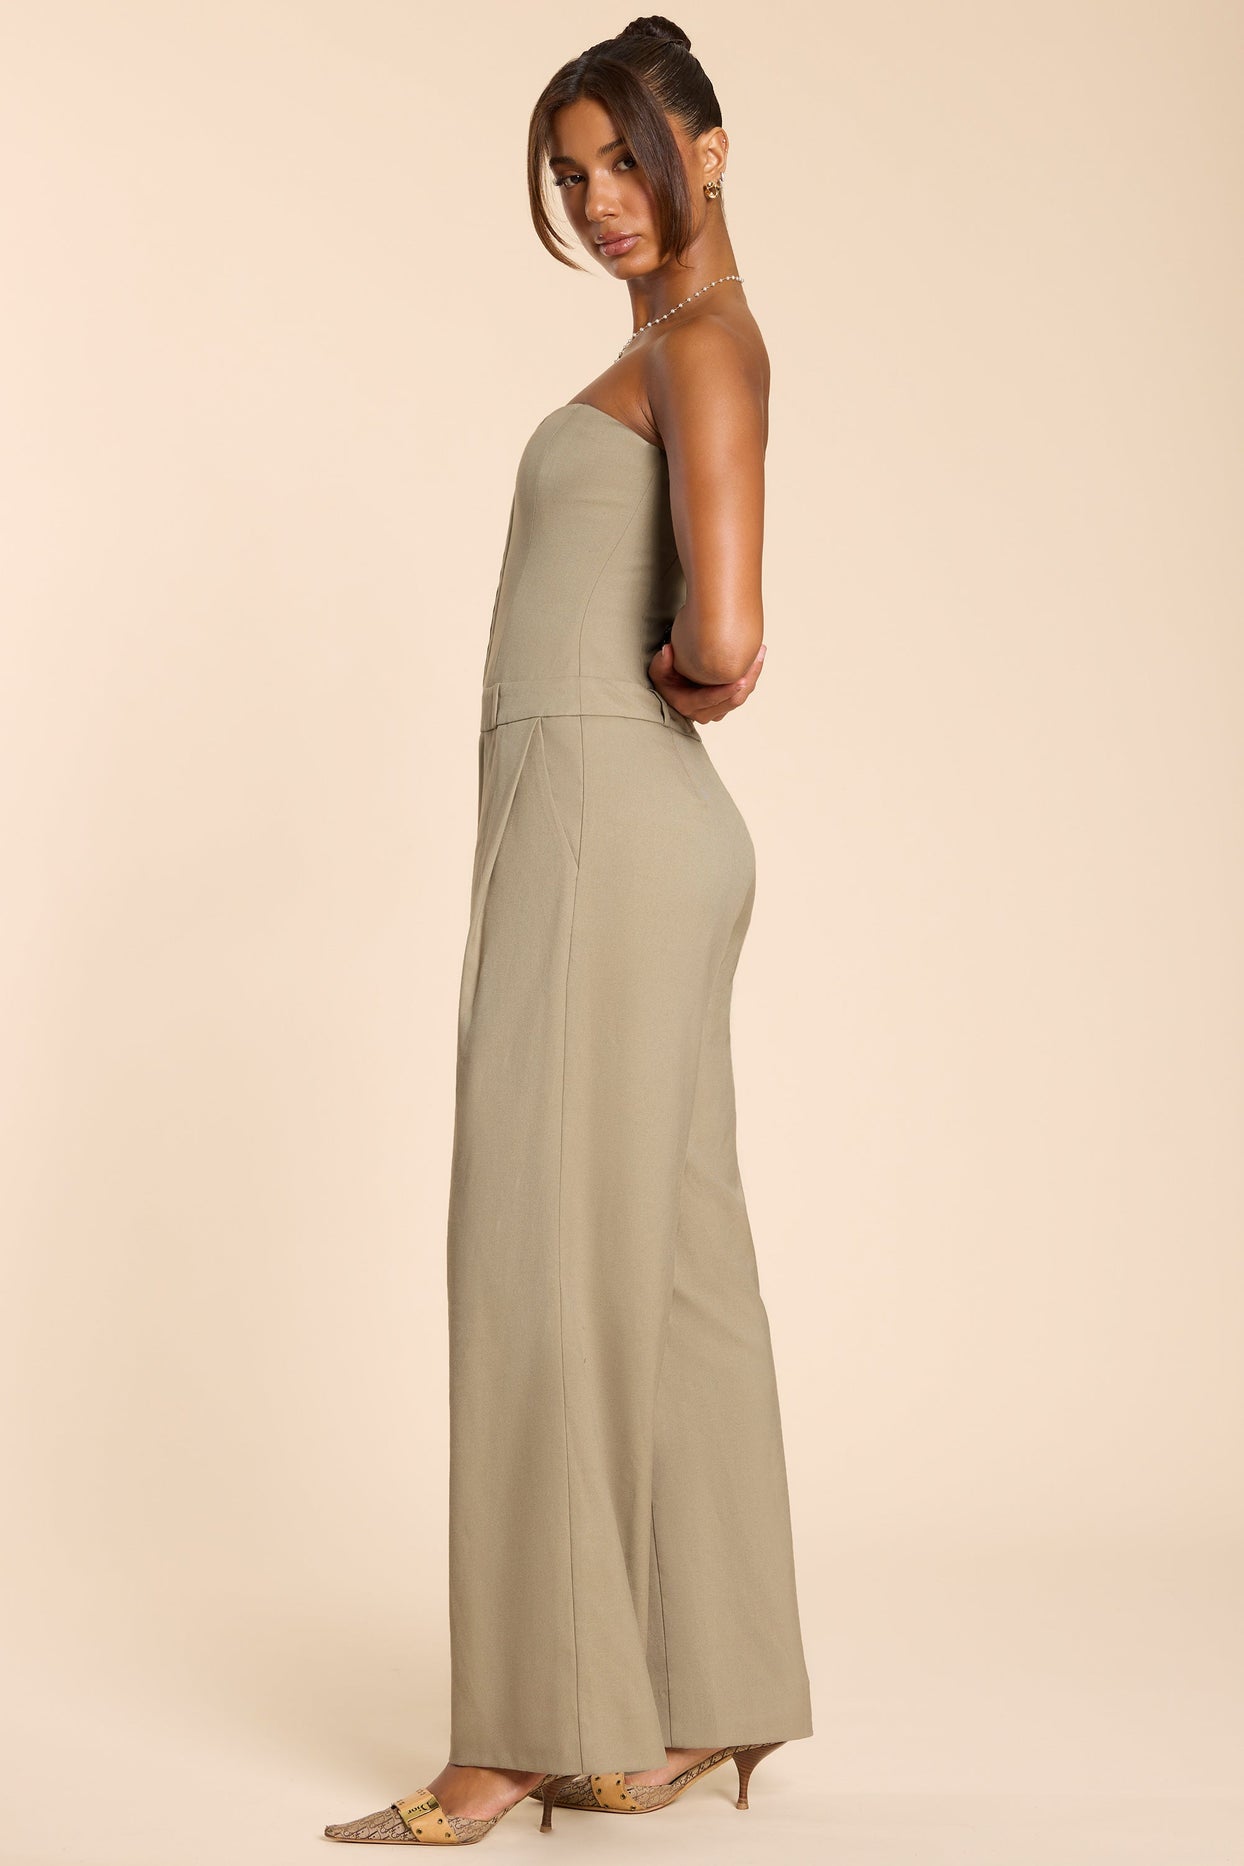 Tall Brushed Twill Bandeau Corset Jumpsuit in Taupe